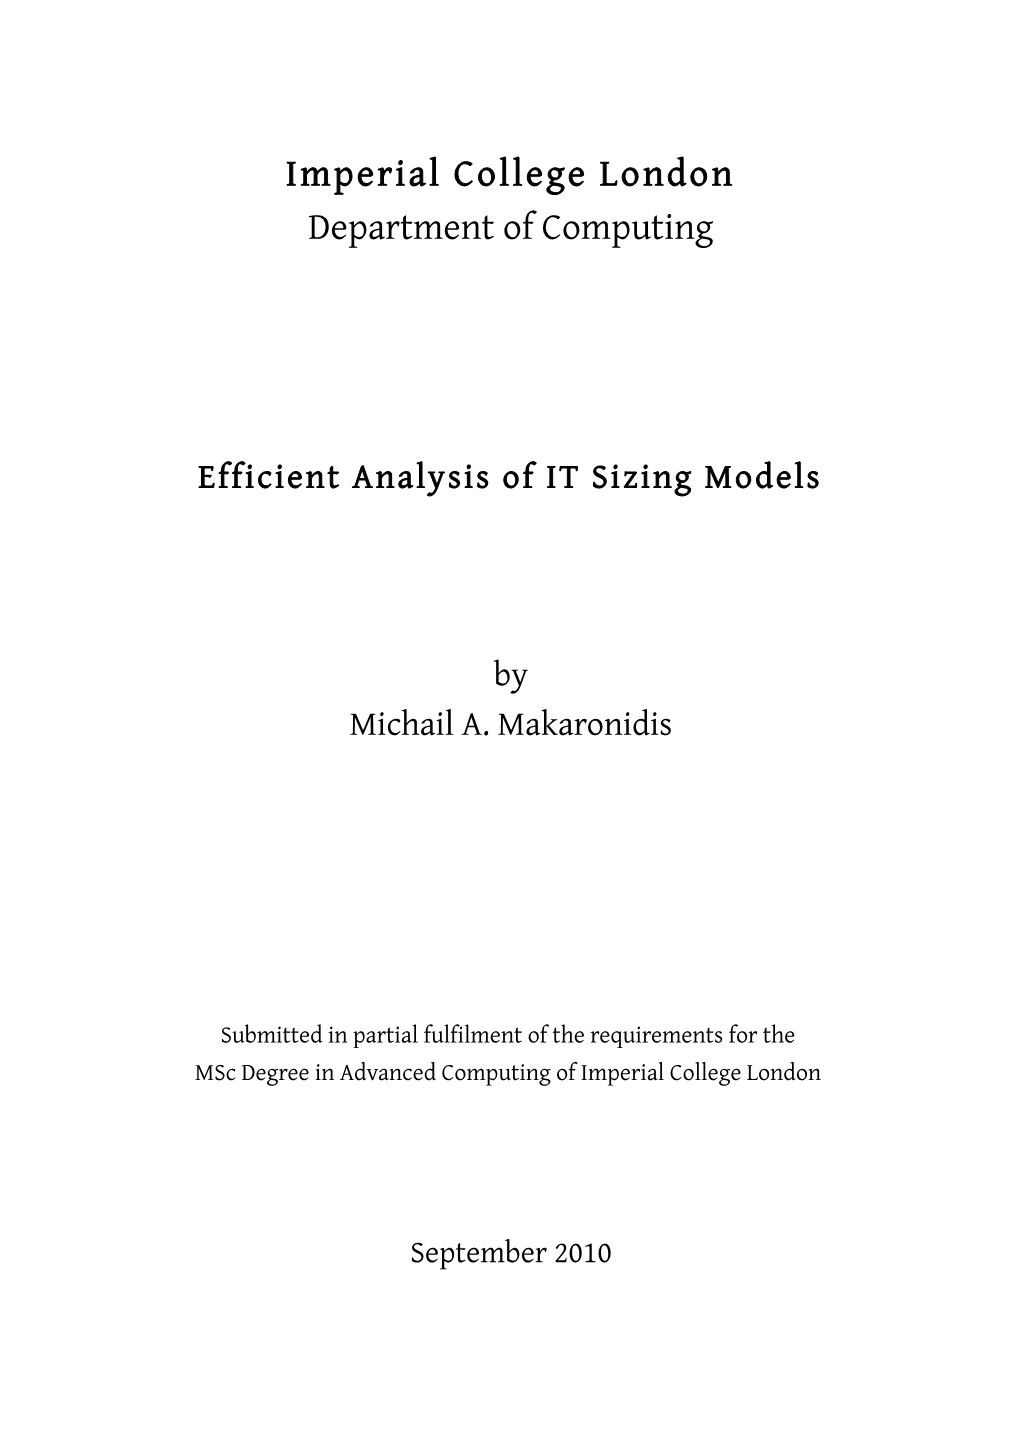 Efficient Analysis of IT Sizing Models by Michail A. Makaronidis